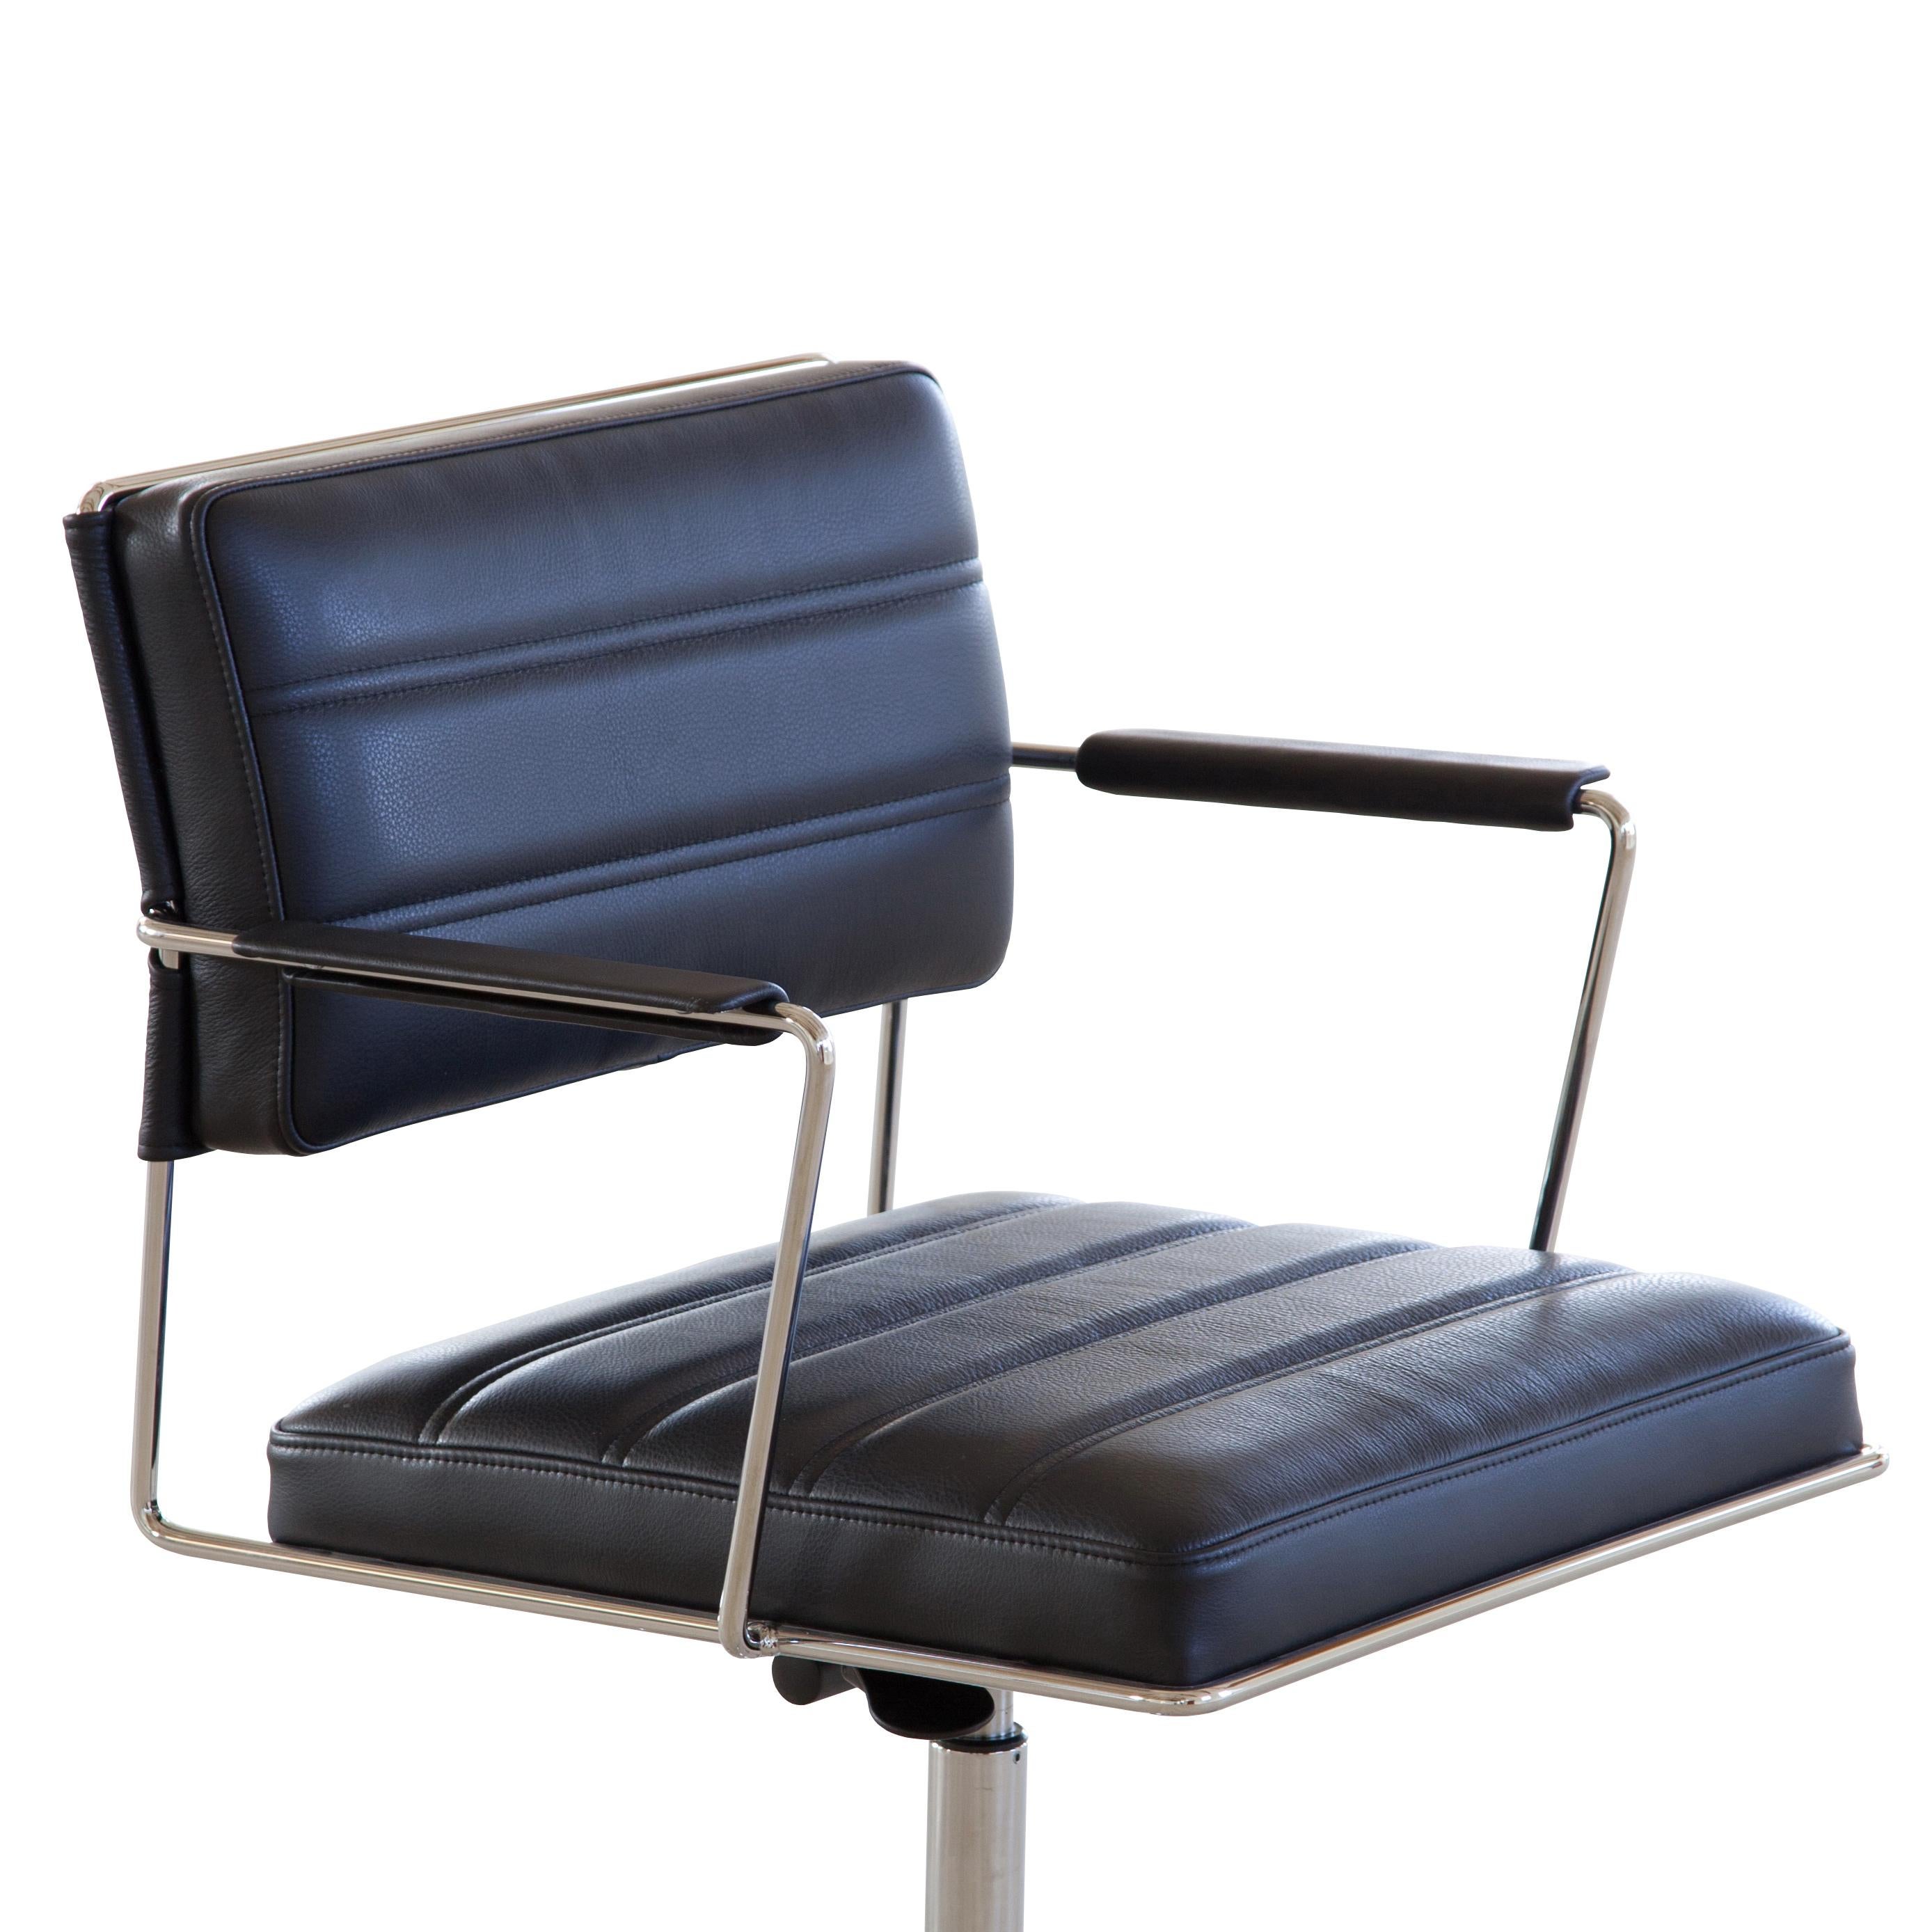 Danish Henrik Tengler, HT 2014 Brown Leather Time Chair by One Collection For Sale